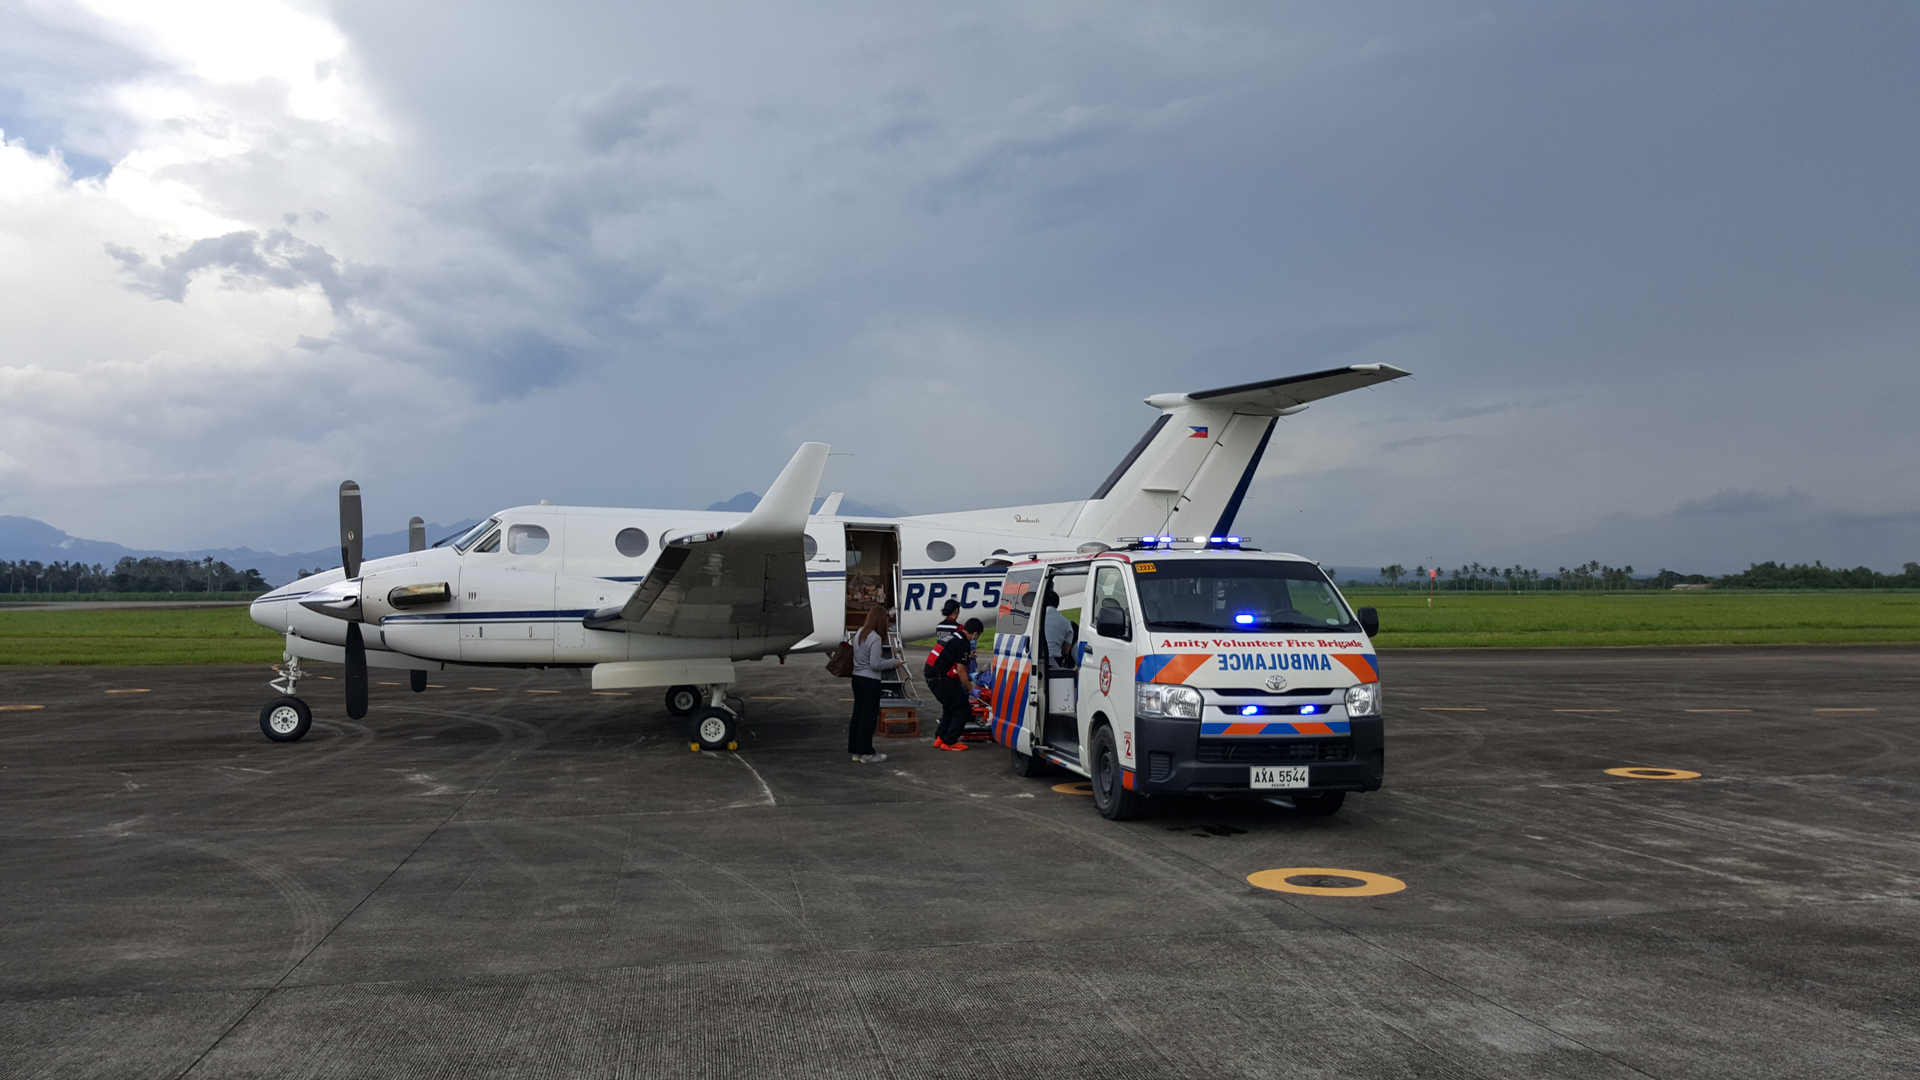 A Comprehensive Guide to Booking Air Ambulances